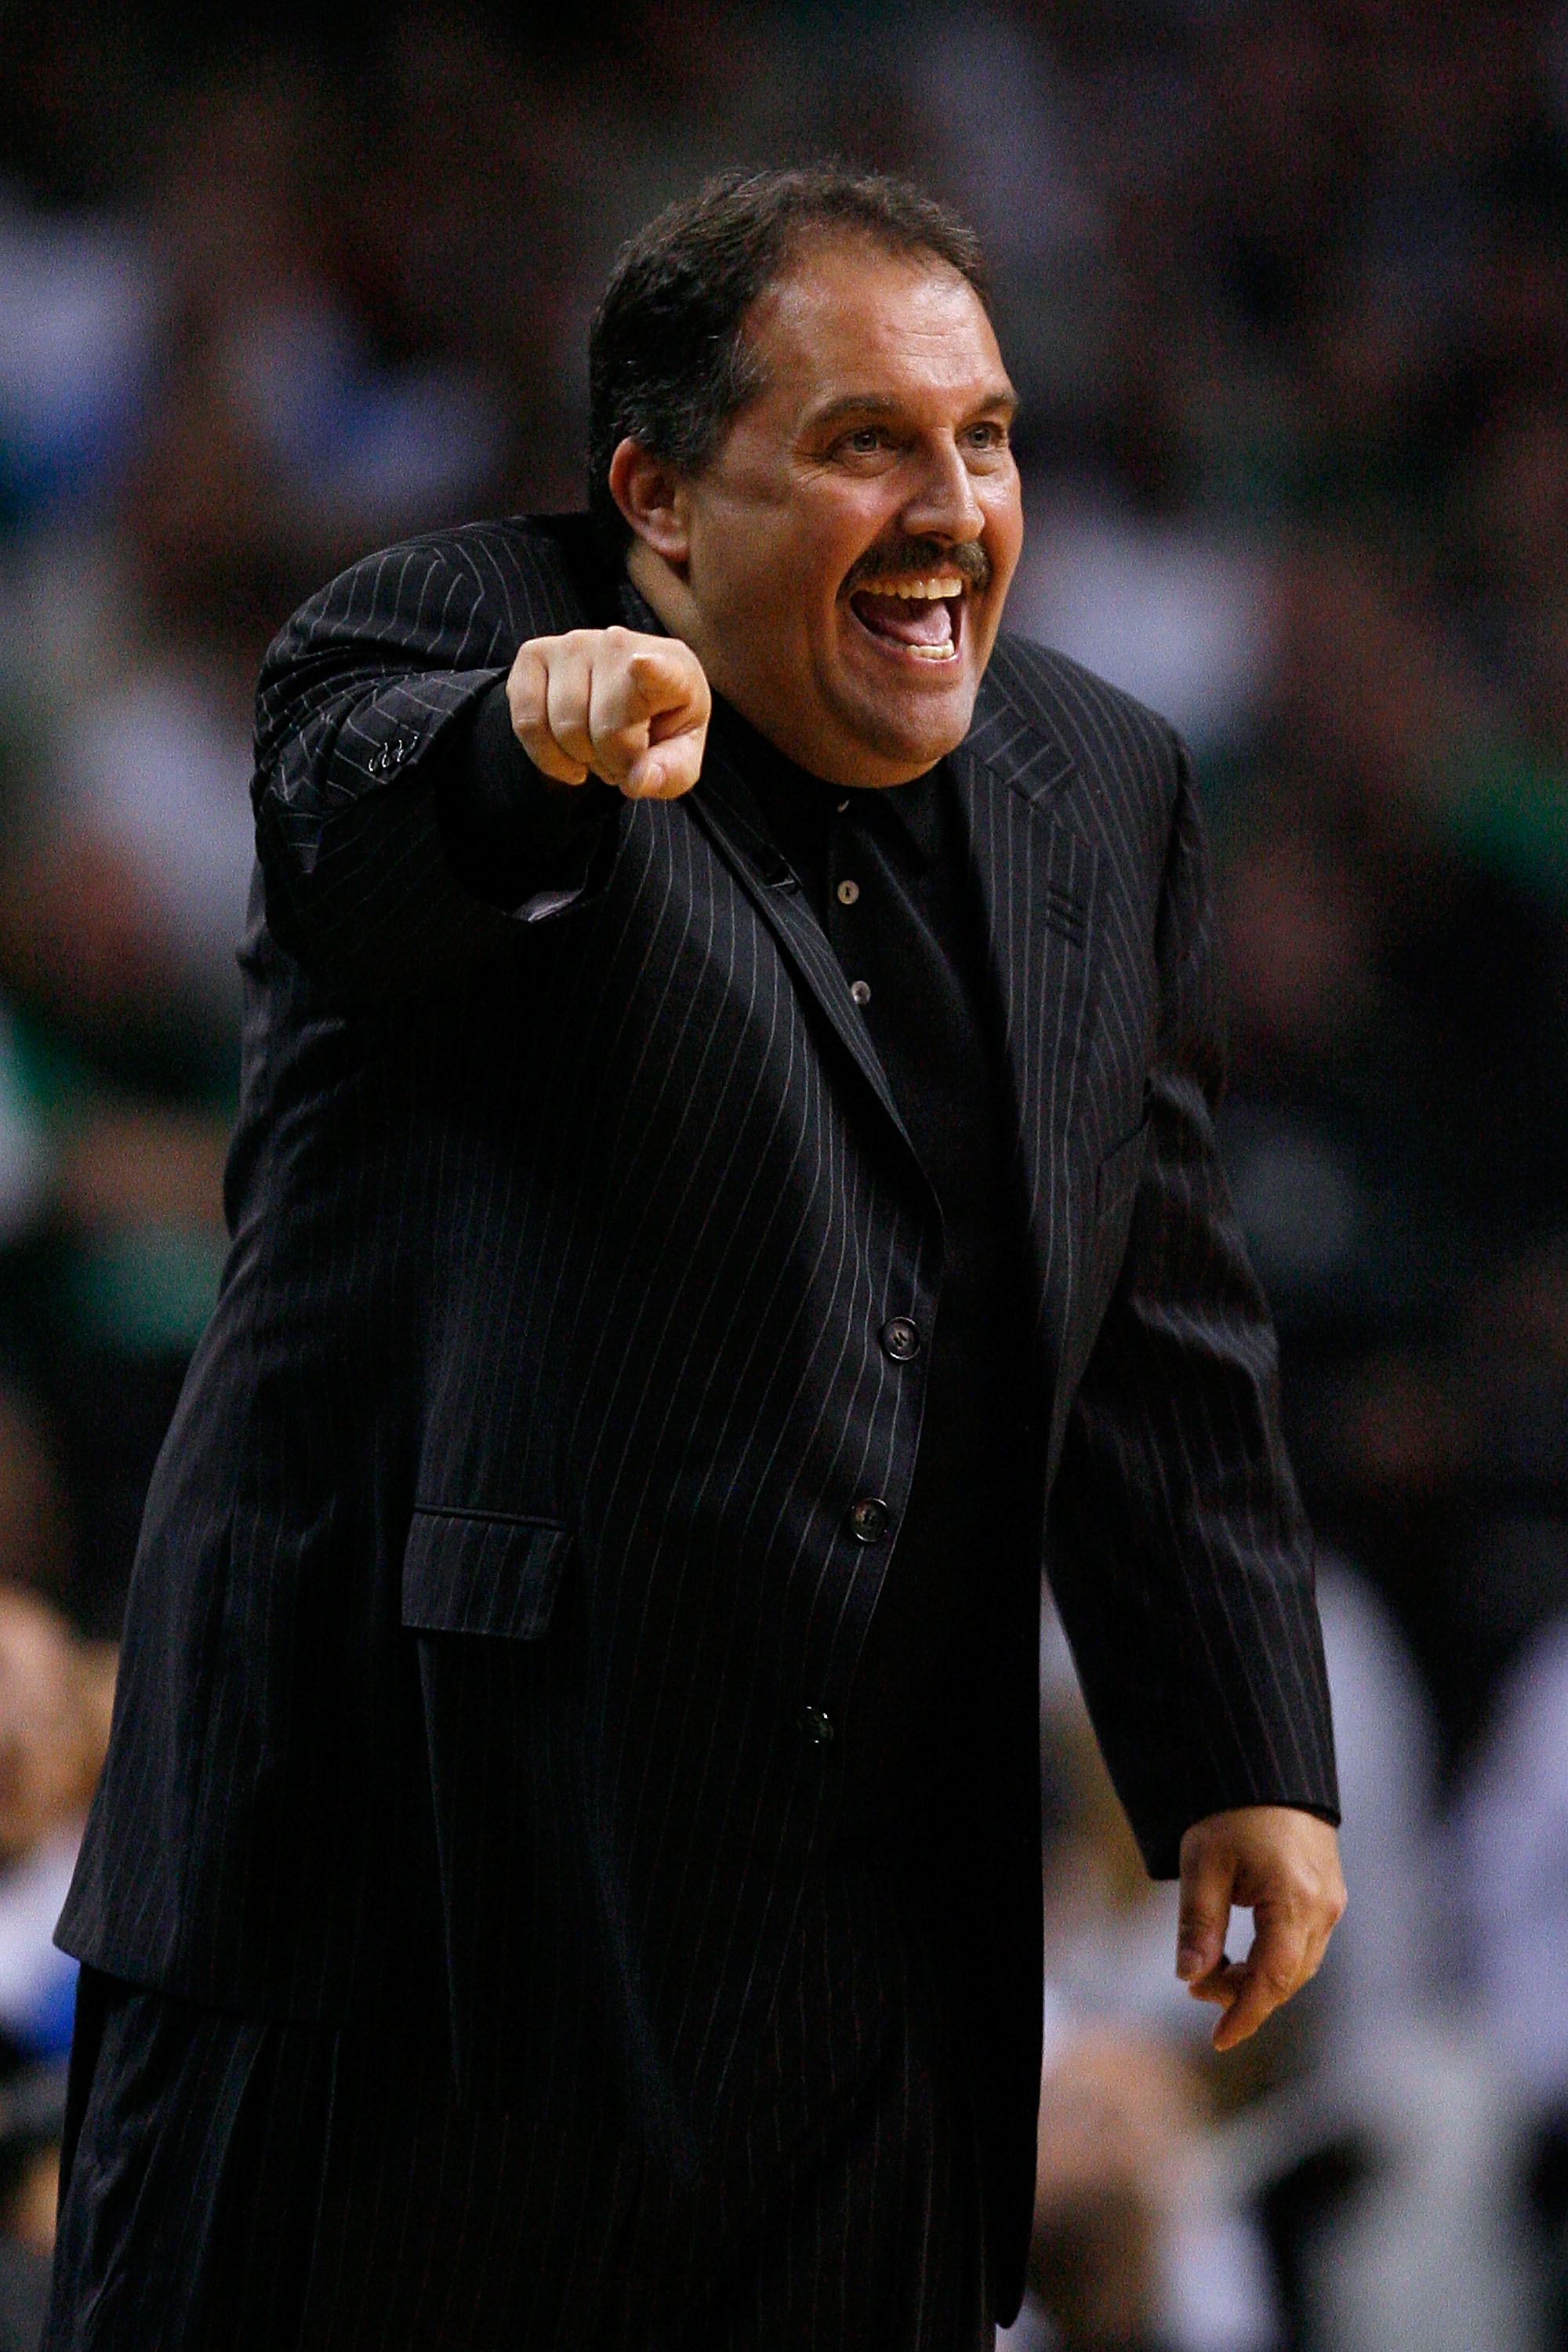 BOSTON - MAY 24:  Head coach Stan Van Gundy of the Orlando Magic reacts as he coaches against the Boston Celtics in Game Four of the Eastern Conference Finals during the 2010 NBA Playoffs at TD Banknorth Garden on May 24, 2010 in Boston, Massachusetts.  N